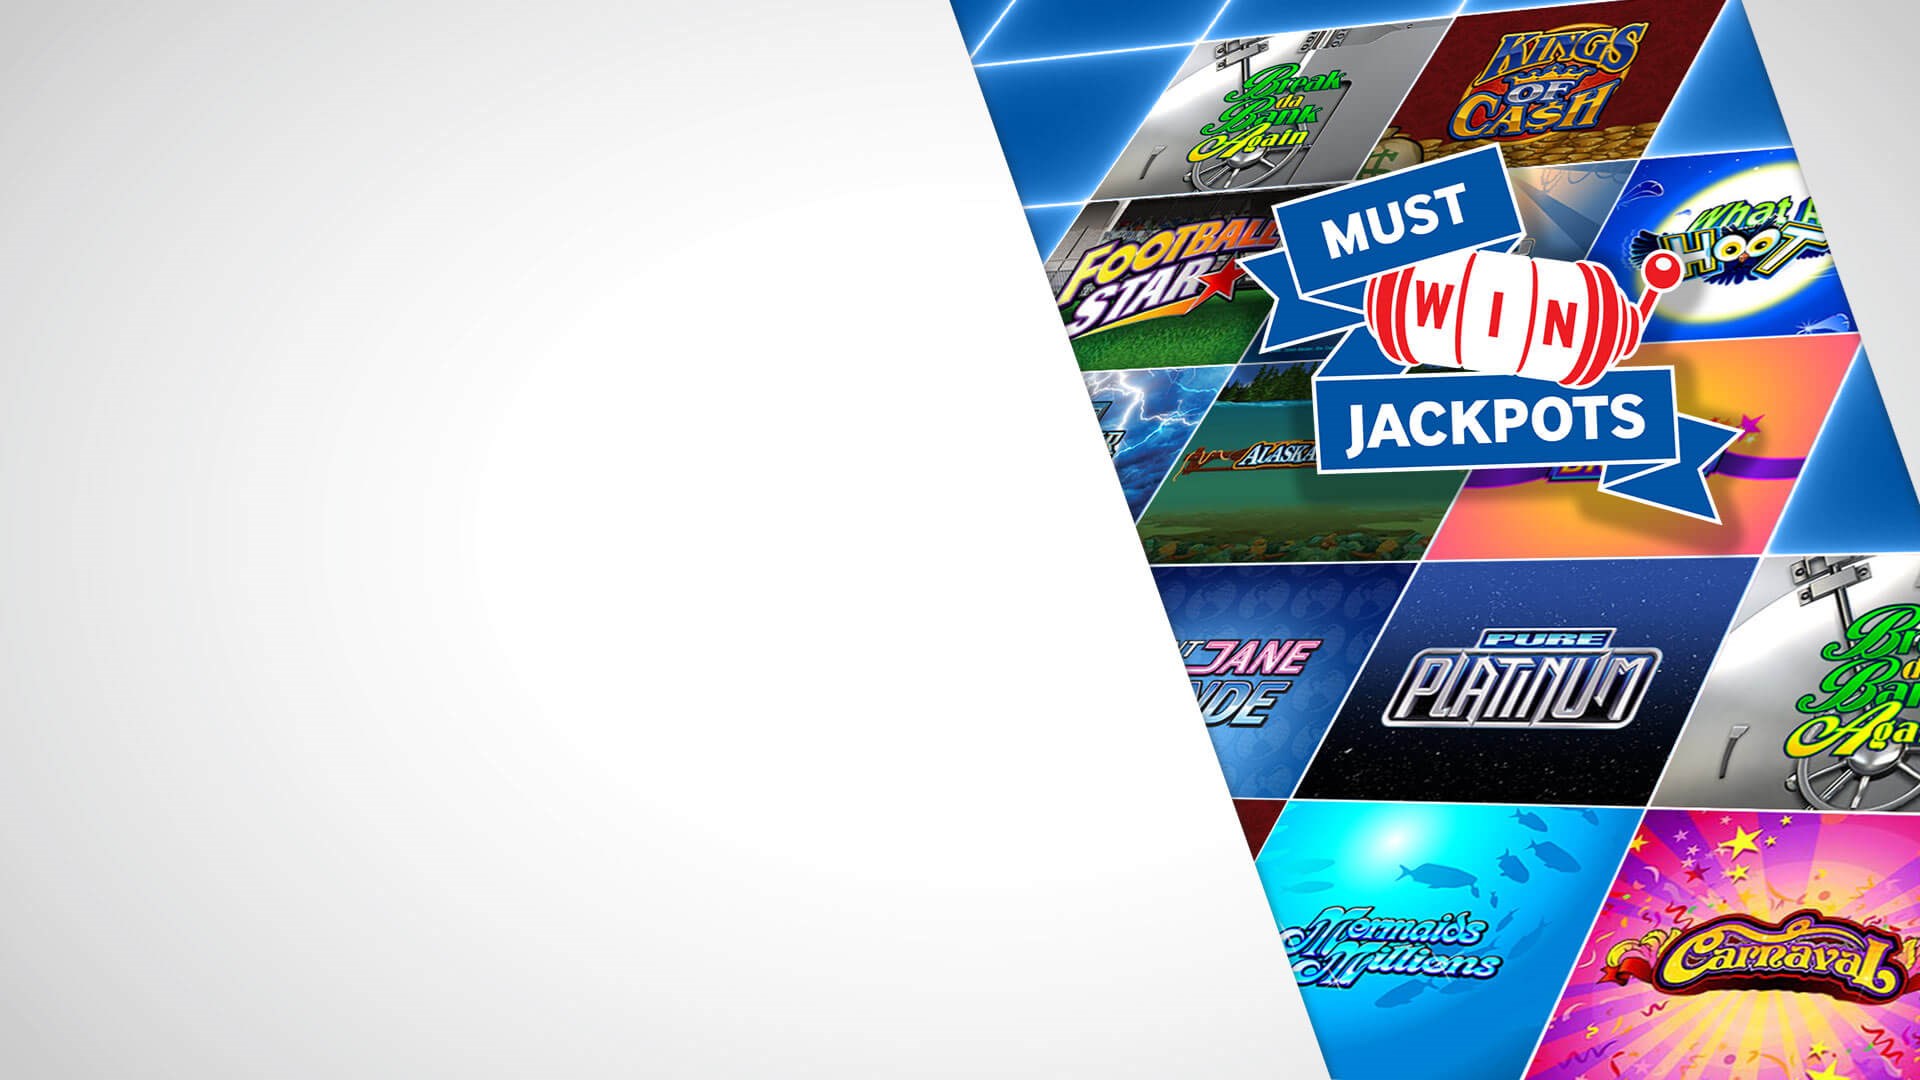 OUR MUST WIN JACKPOTS ARE AVAILABLE ON OVER 20 DIFFERENT SLOT GAMES